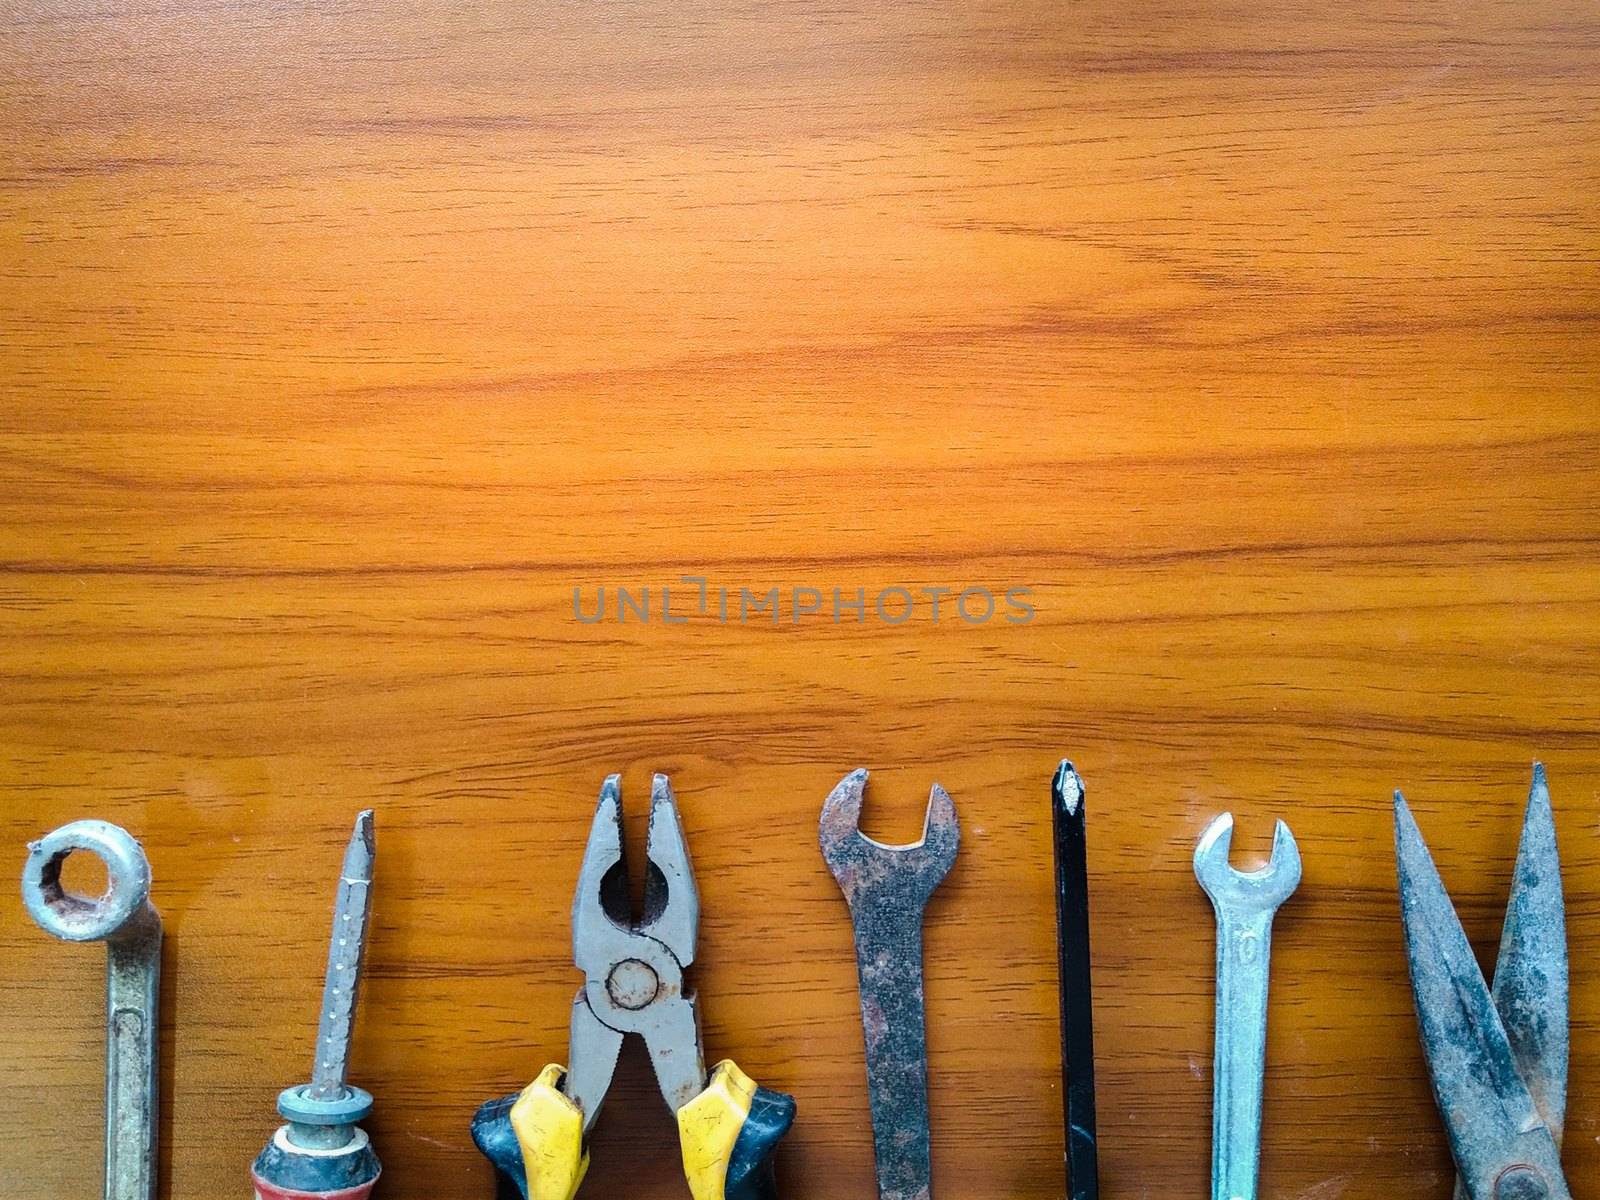 The repair tools were placed on a brownish-yellow table.